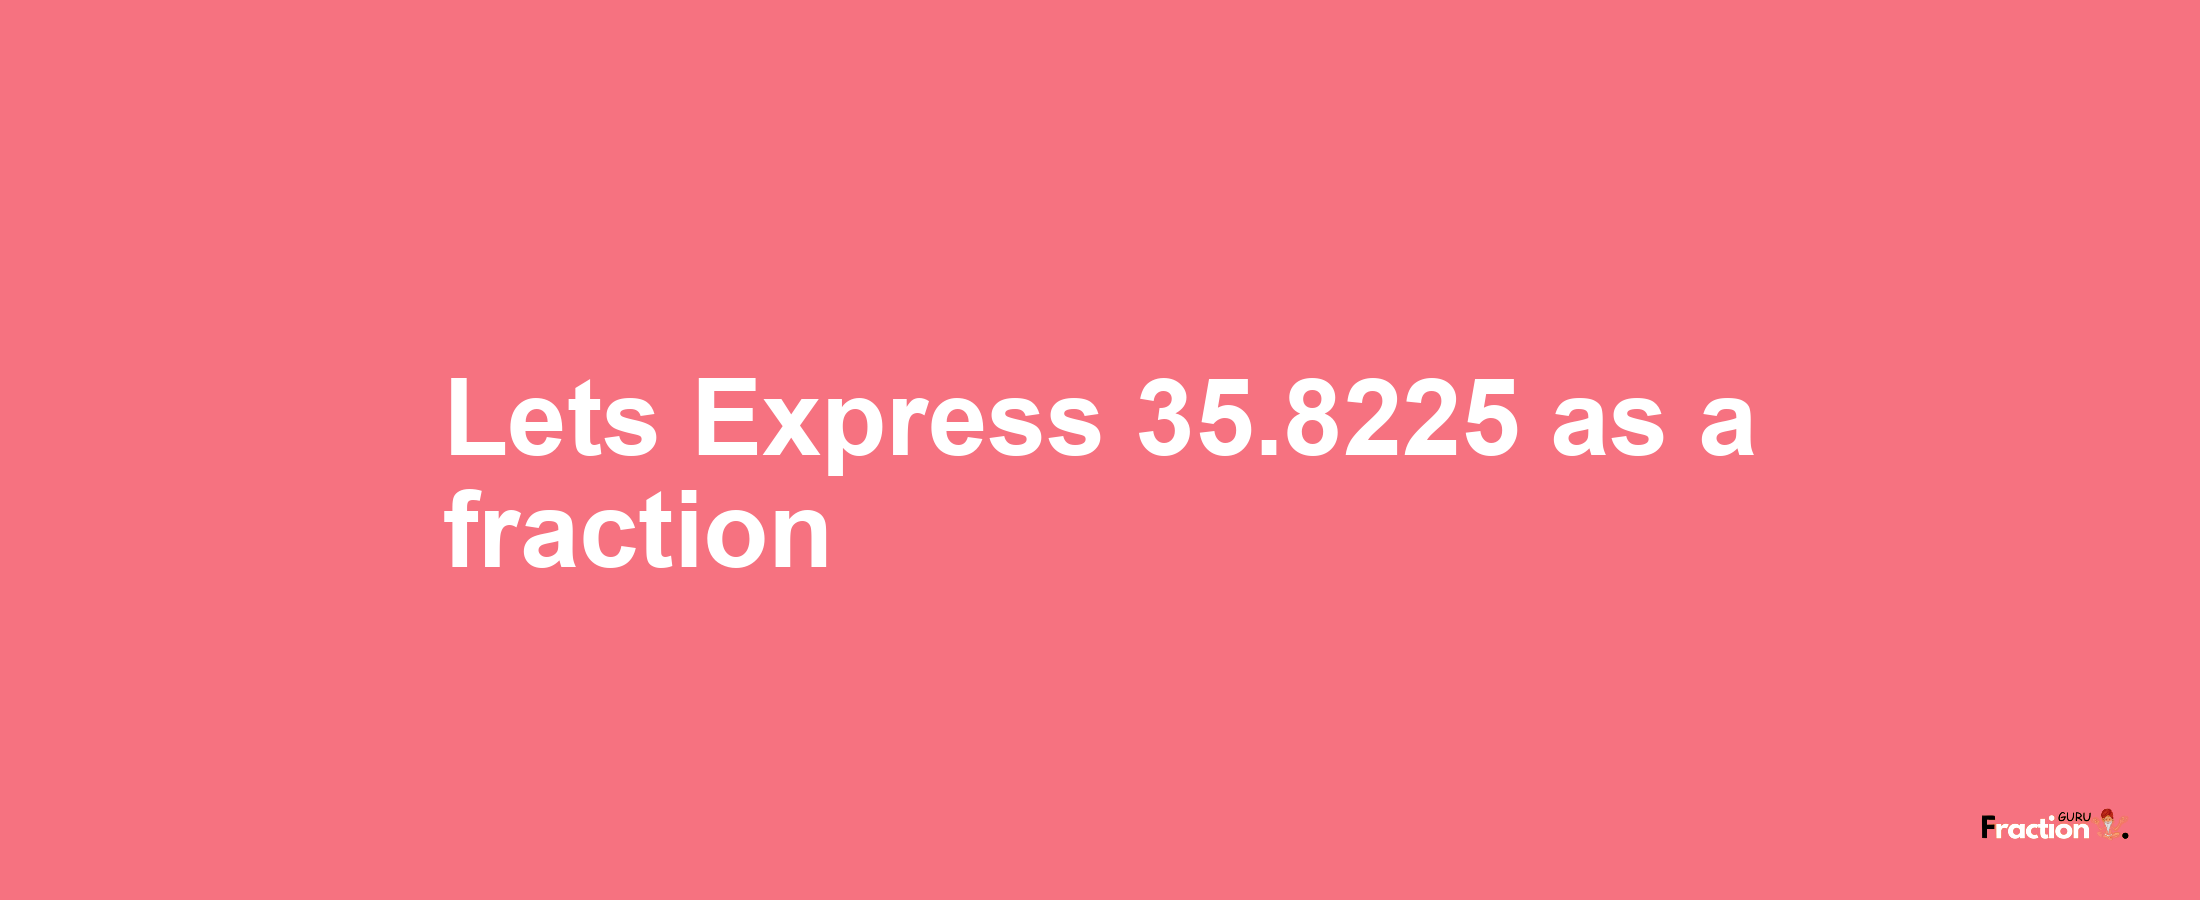 Lets Express 35.8225 as afraction